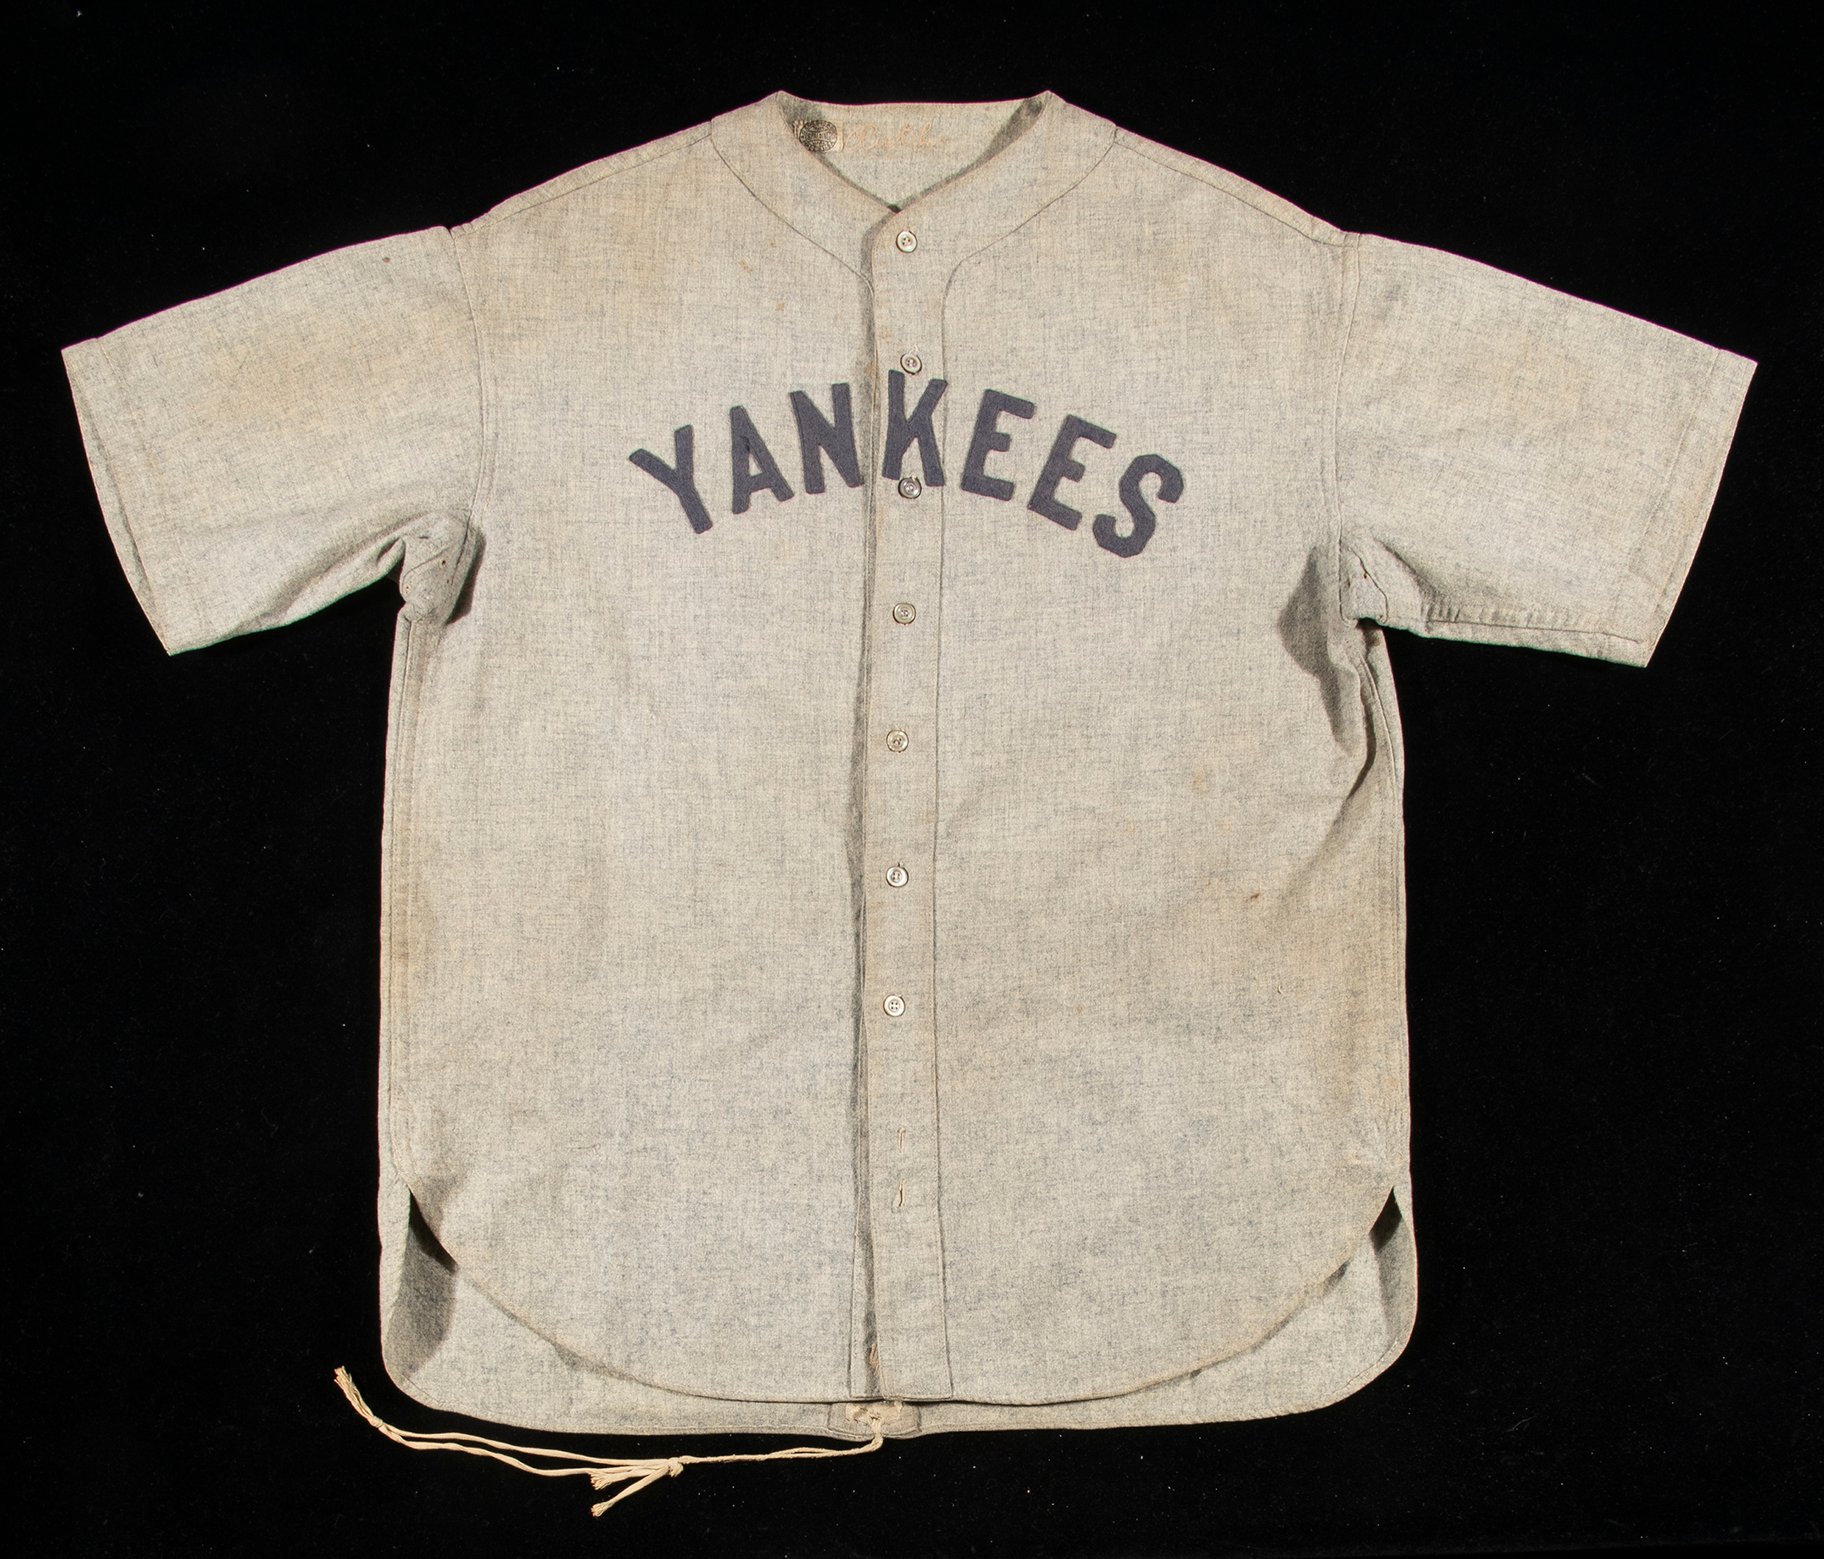 babe ruth jersey auction